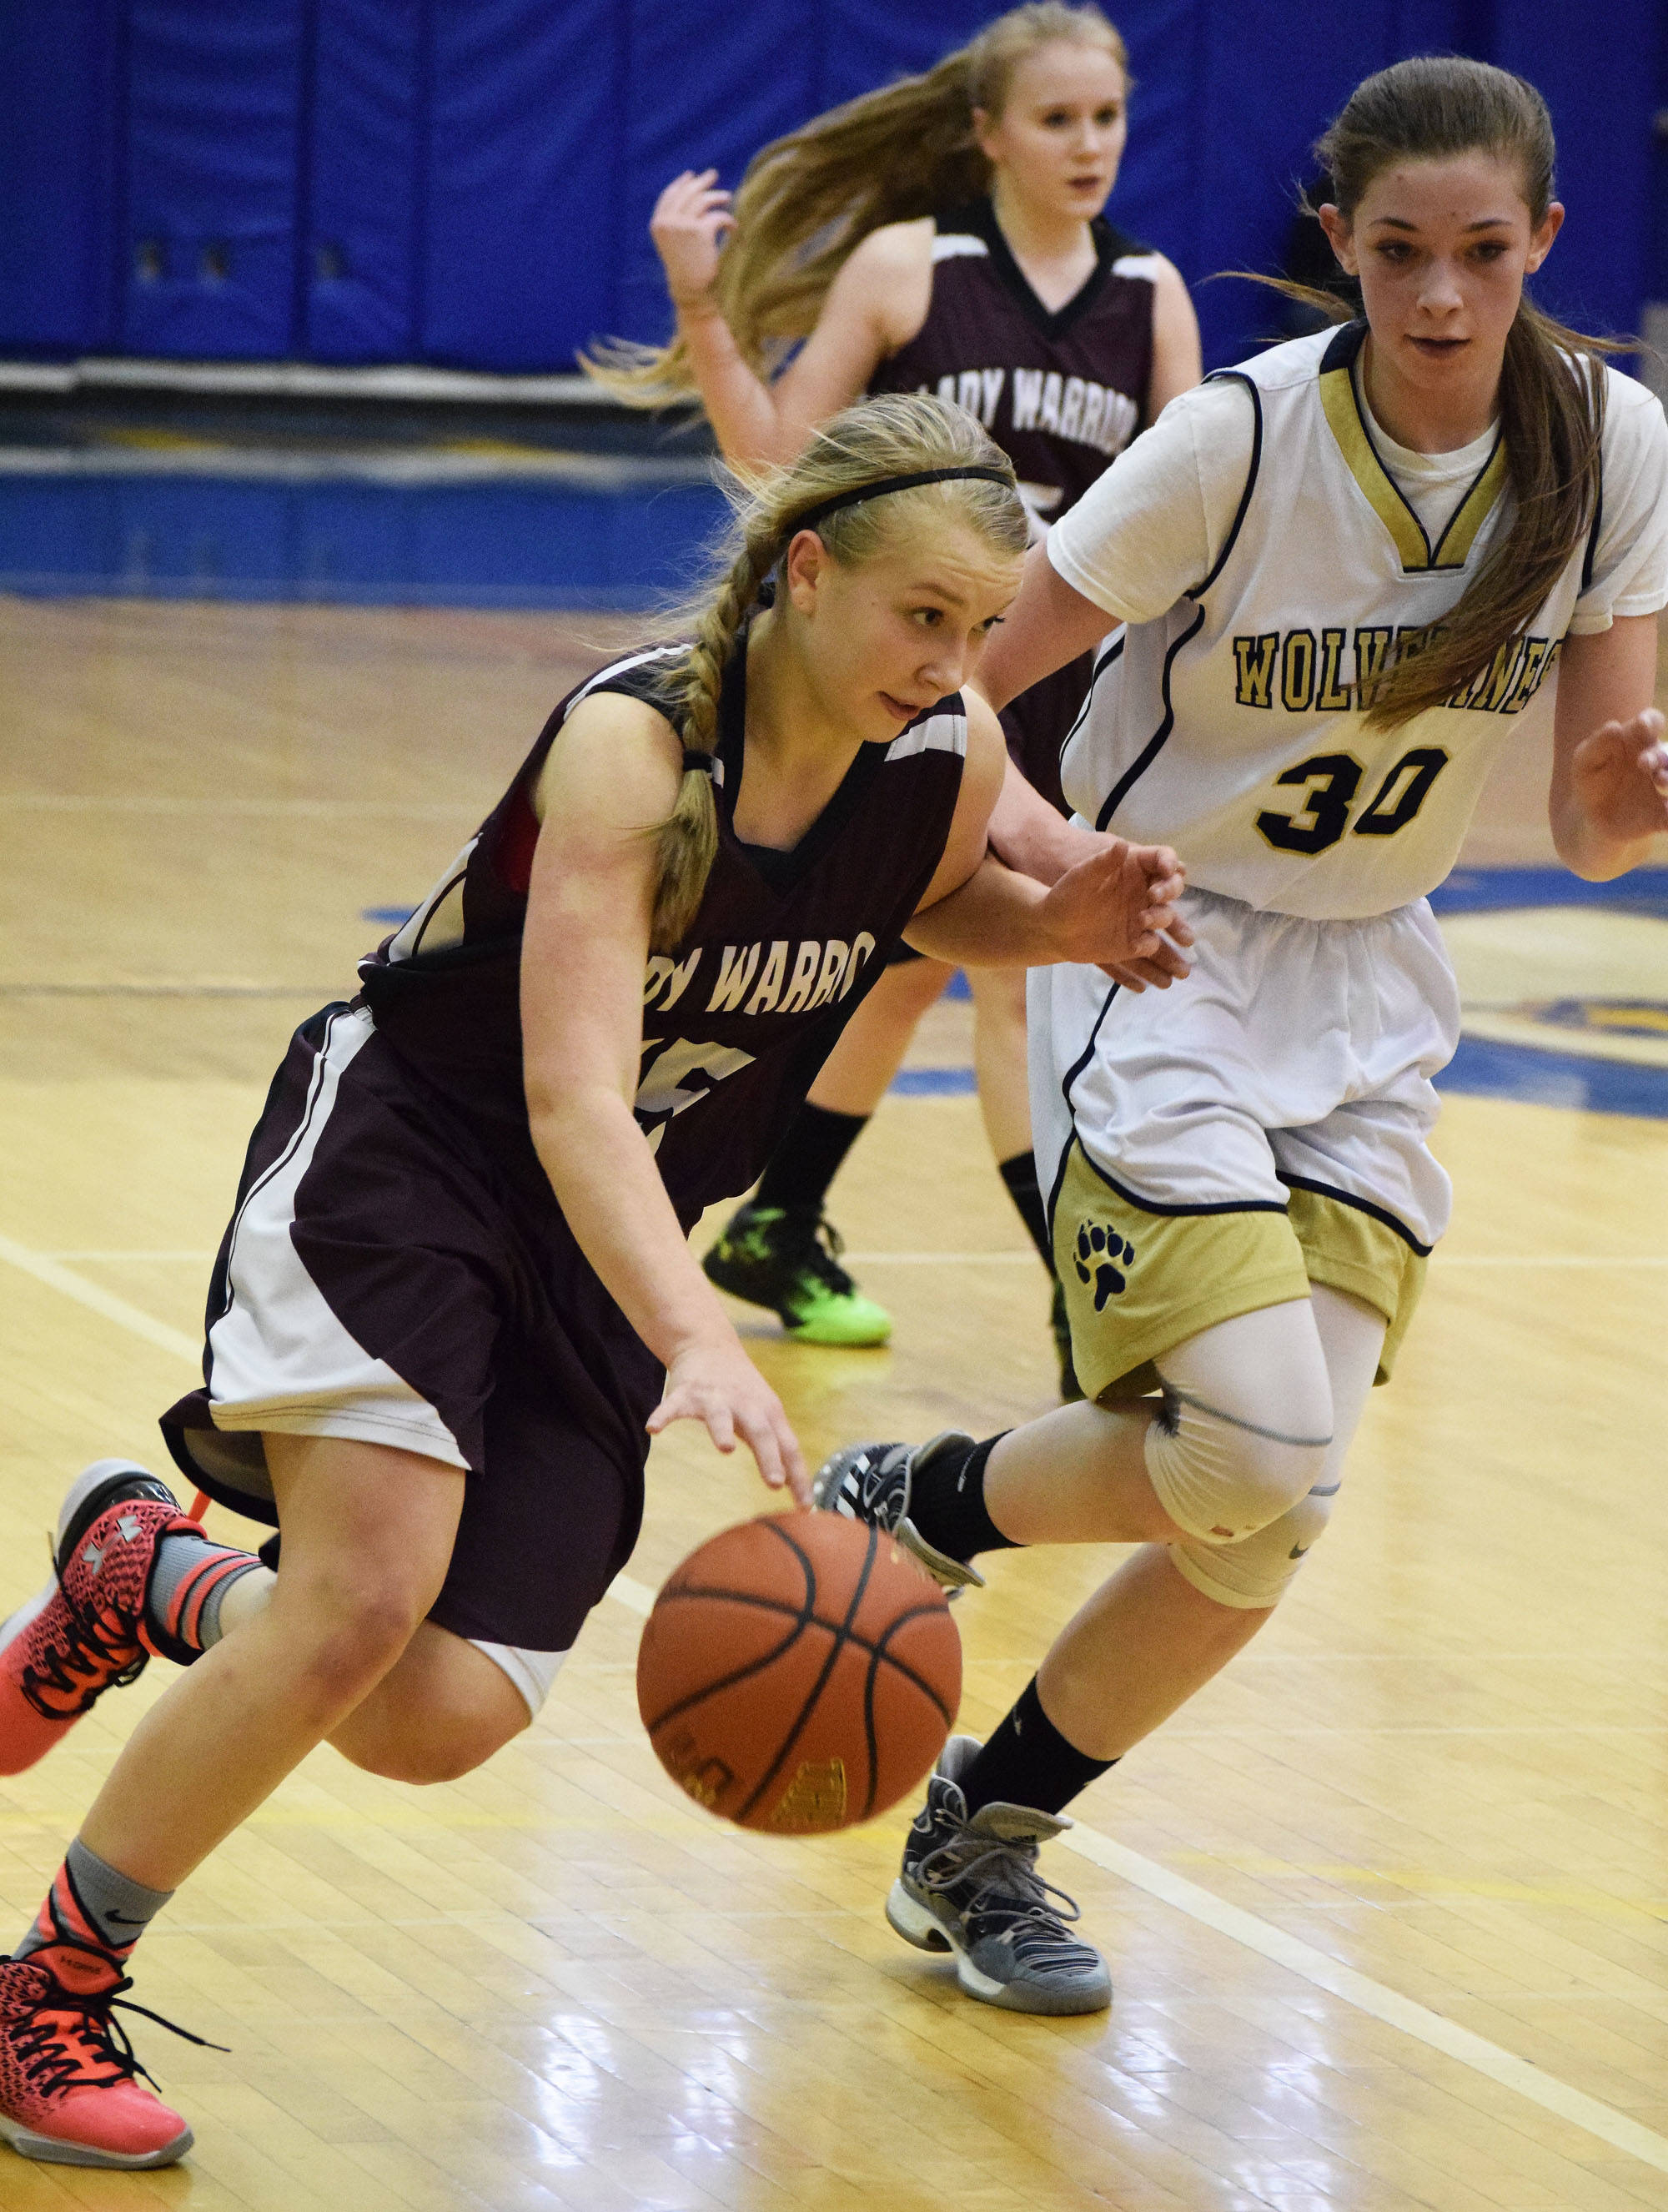 Nikolaevsk’s Vera Fefelov (left) dribbles into the lane against Ninilchik’s DeeAnn White in Friday’s Peninsula Conference girls championship game at Homer High School. (Photo by Joey Klecka/Peninsula Clarion)